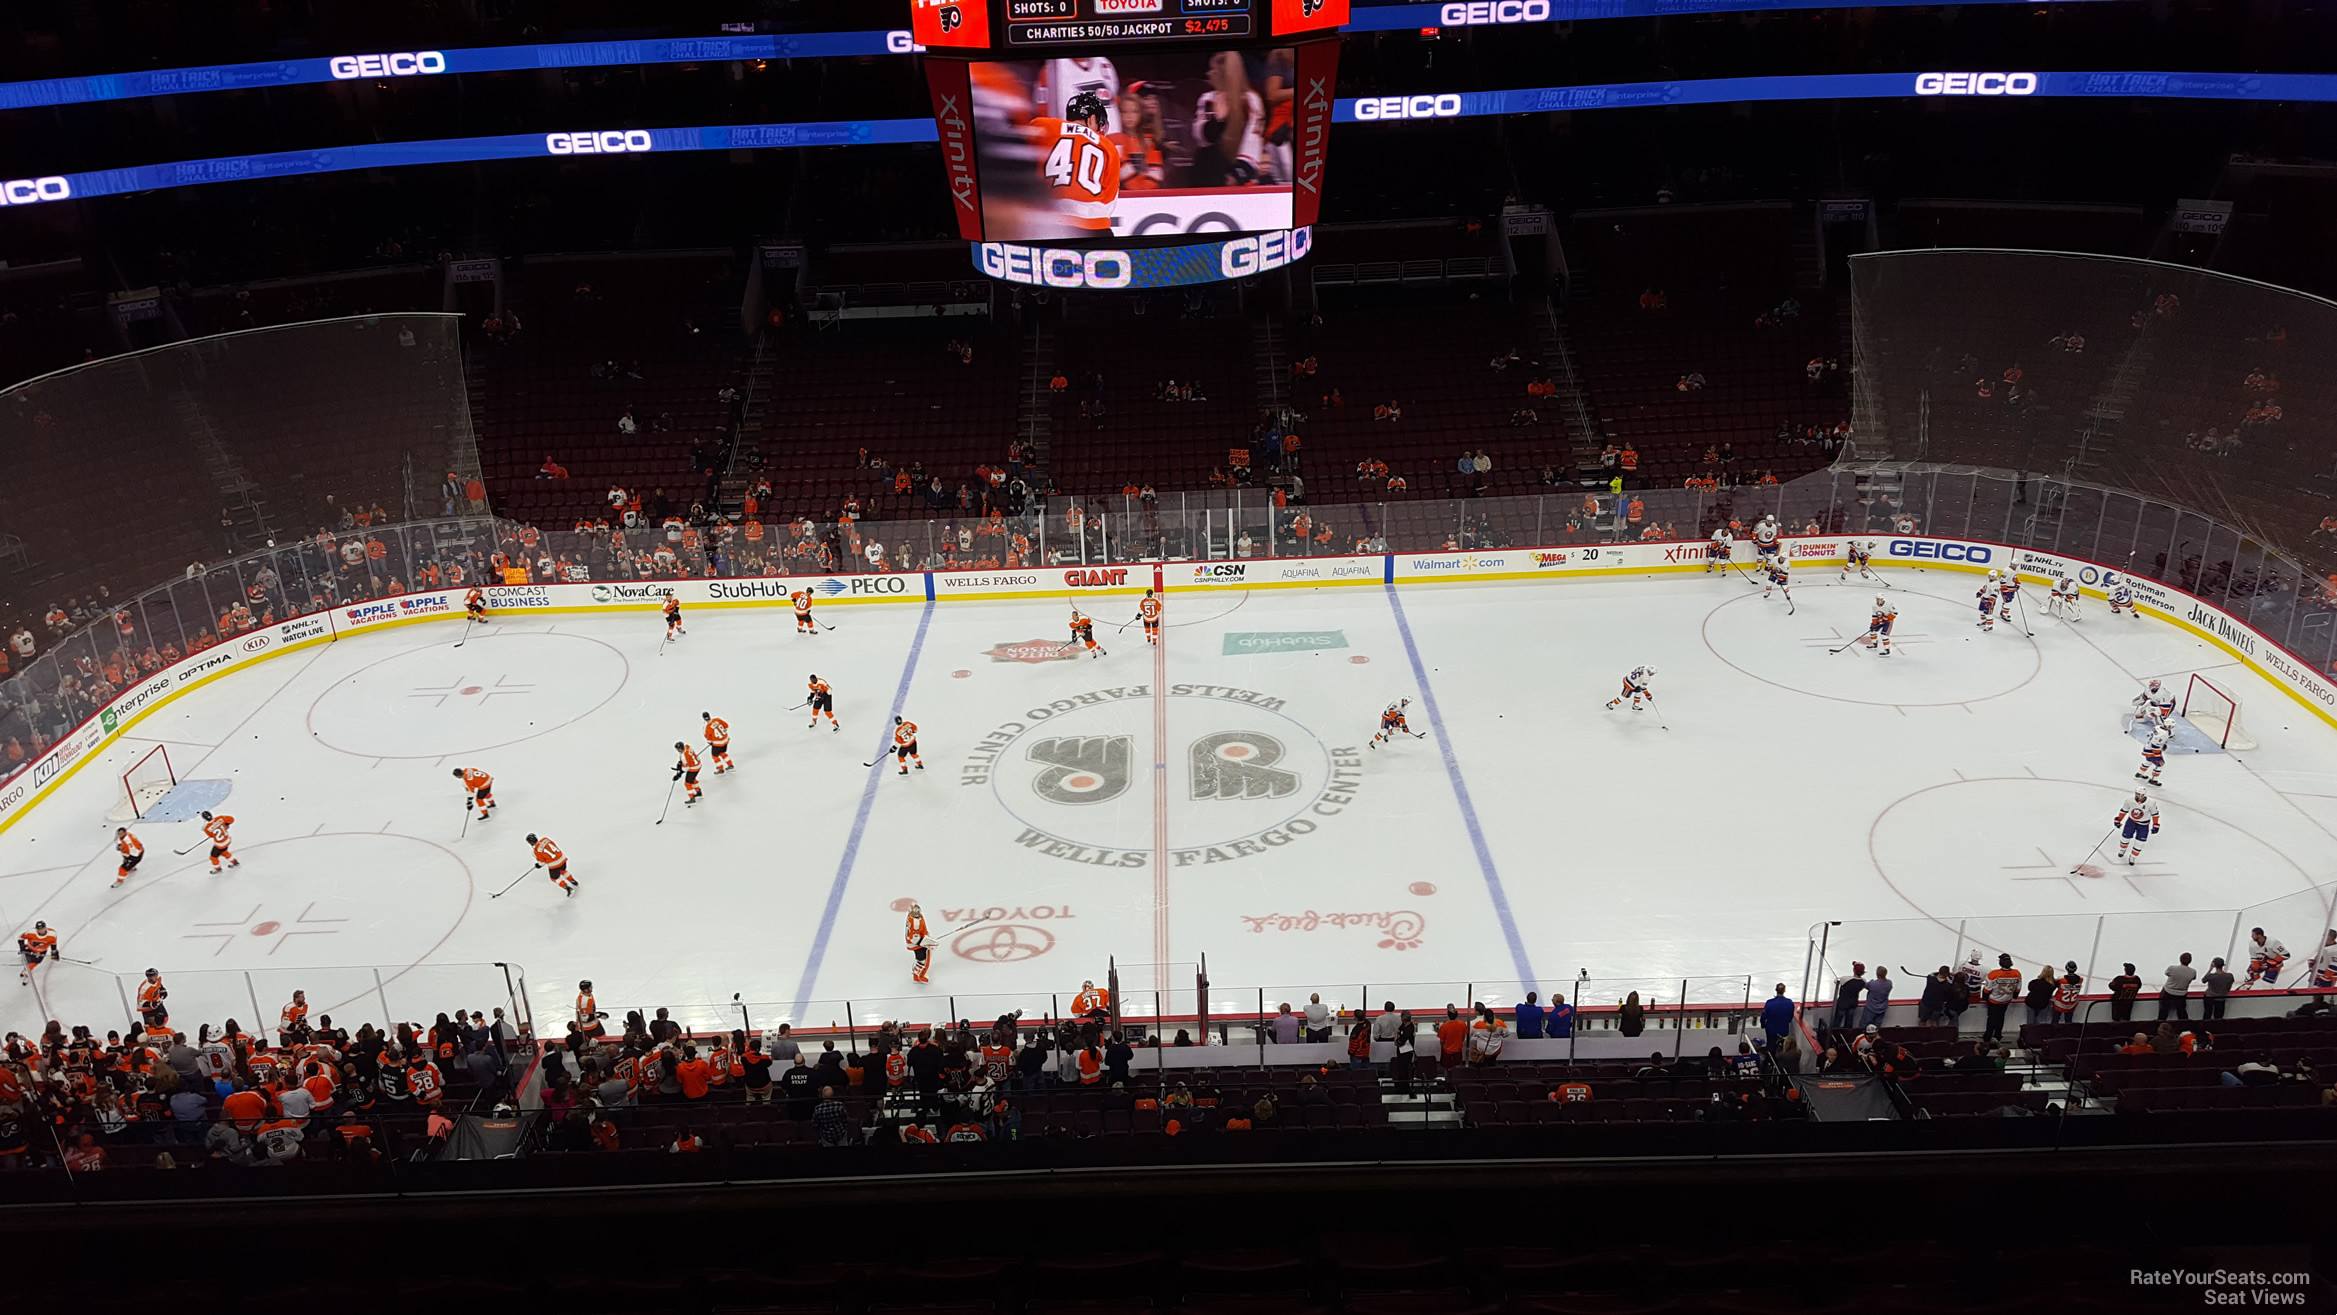 section 201, row 8 seat view  for hockey - wells fargo center